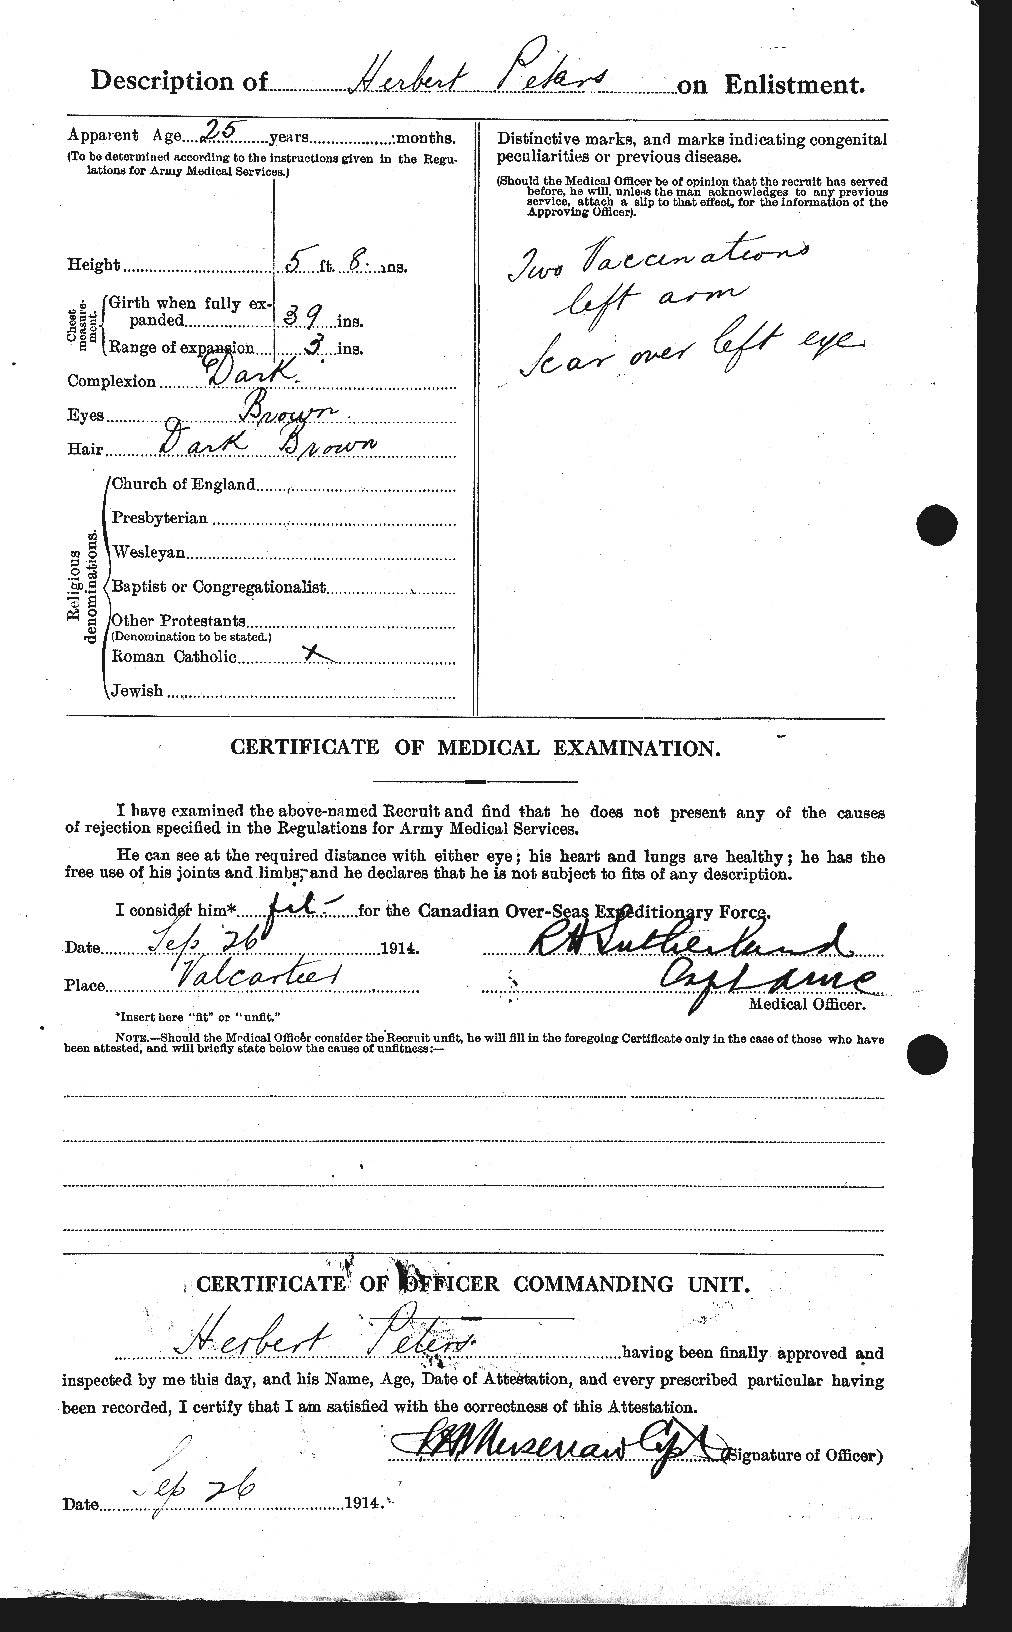 Personnel Records of the First World War - CEF 575498b